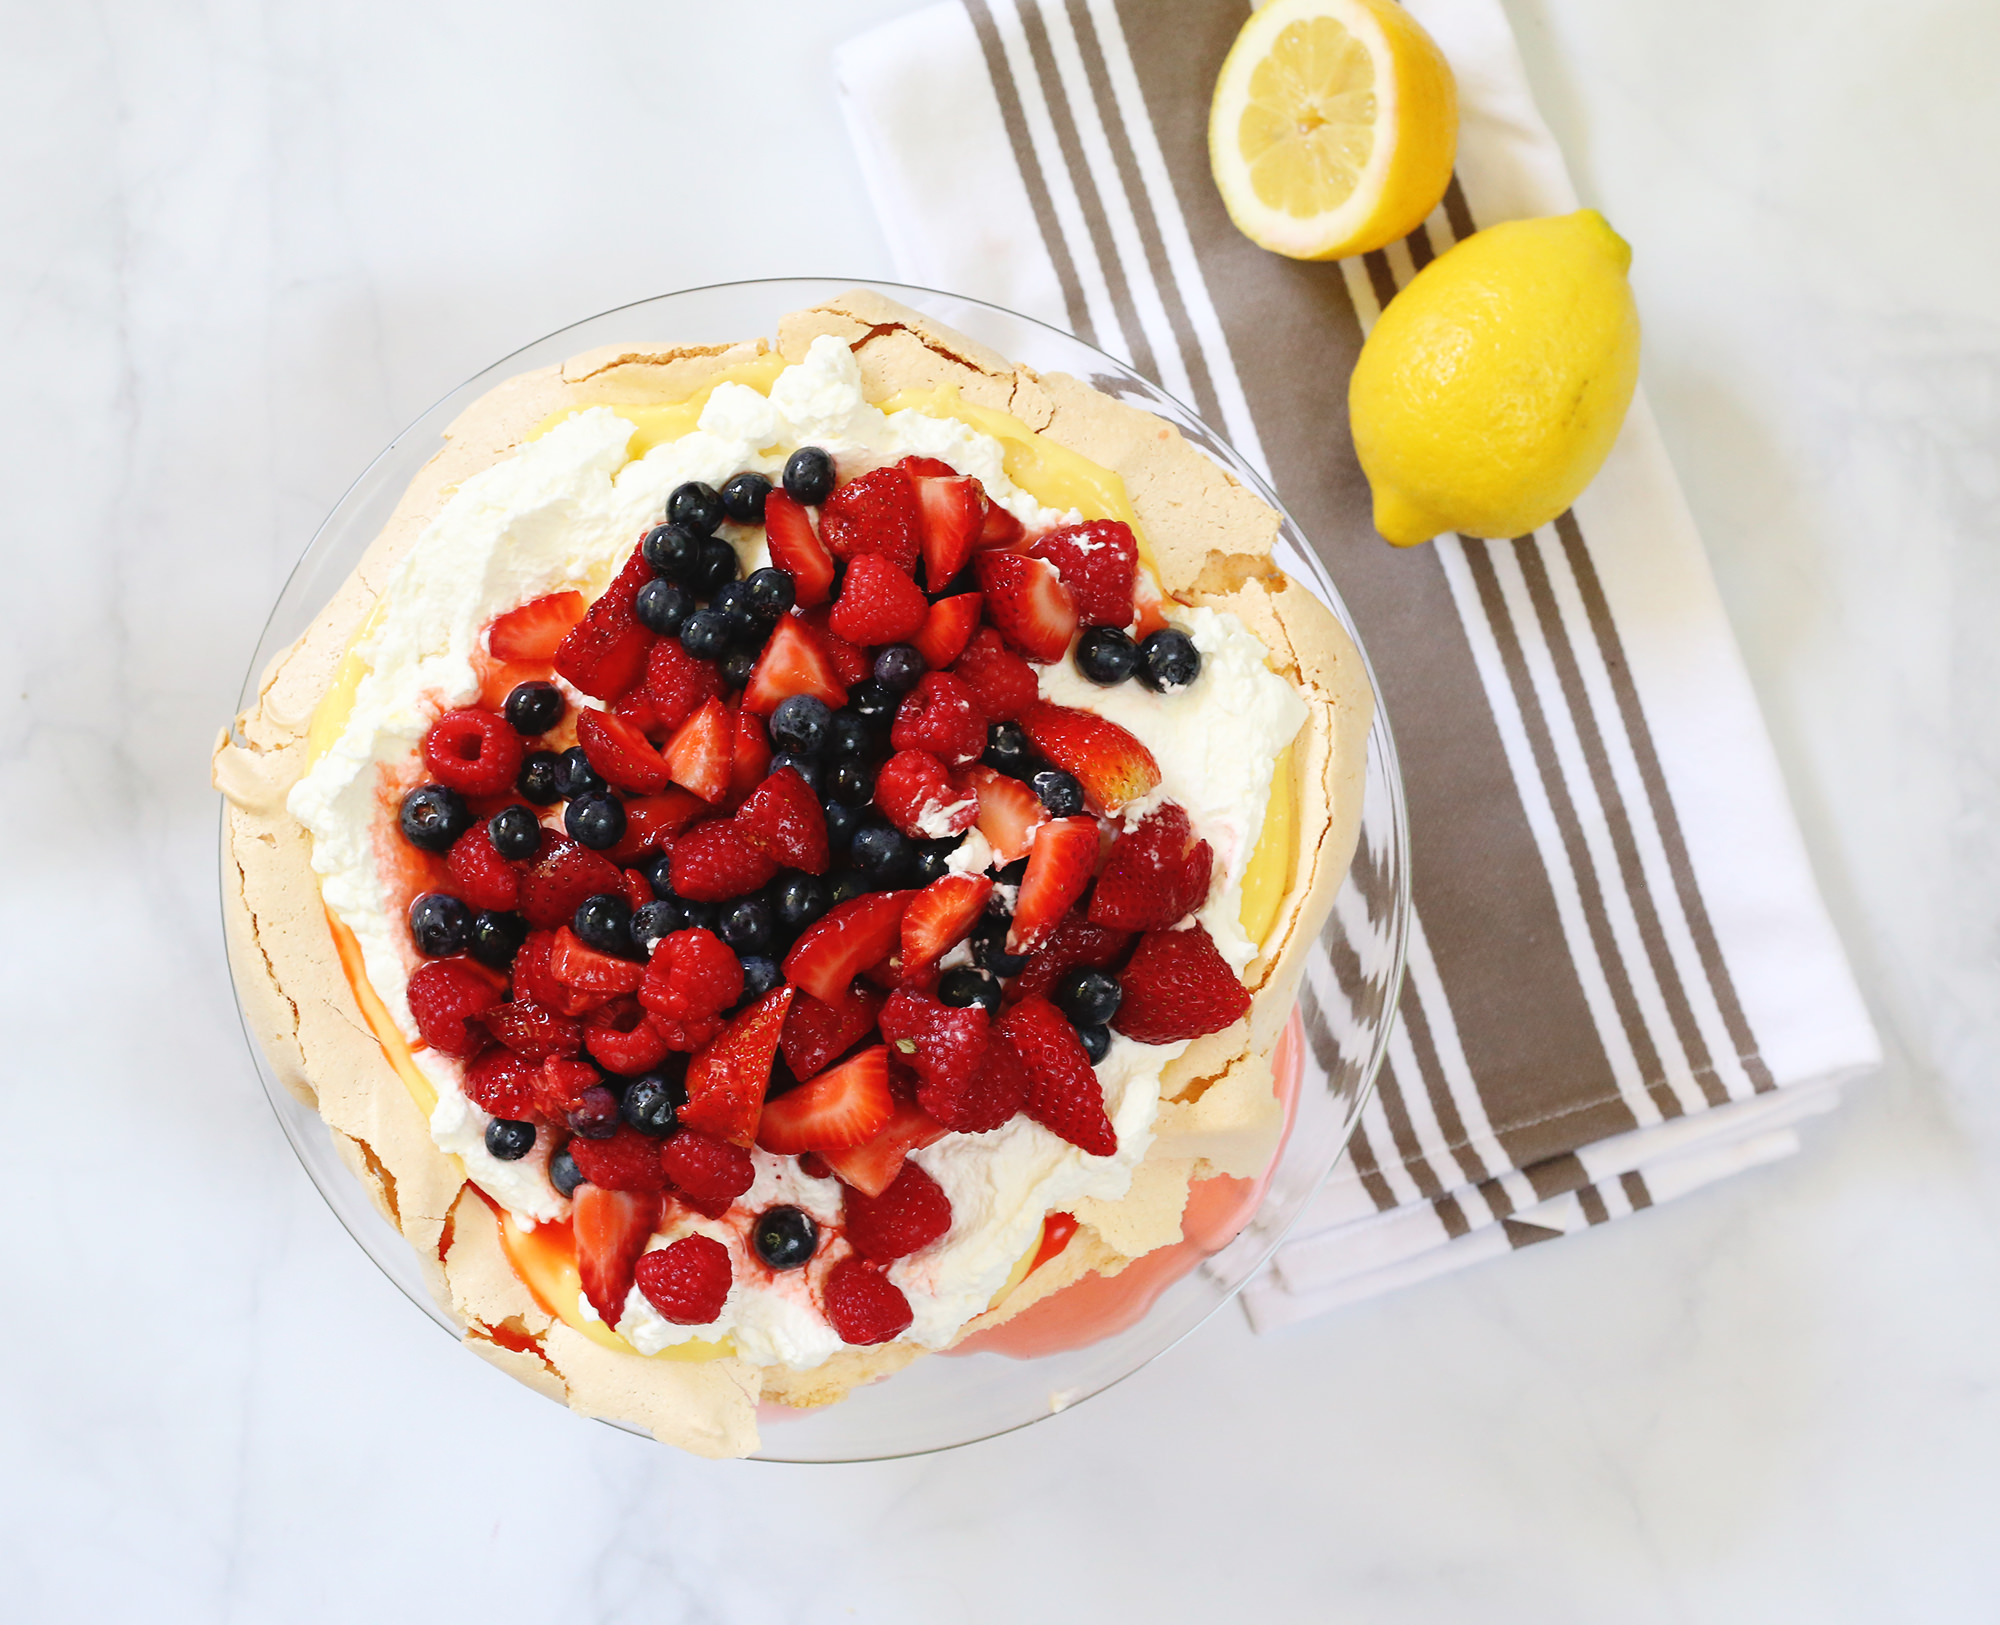 Ina Garten's delicious summer pavlova recipe brought to life via Lily & Val Living